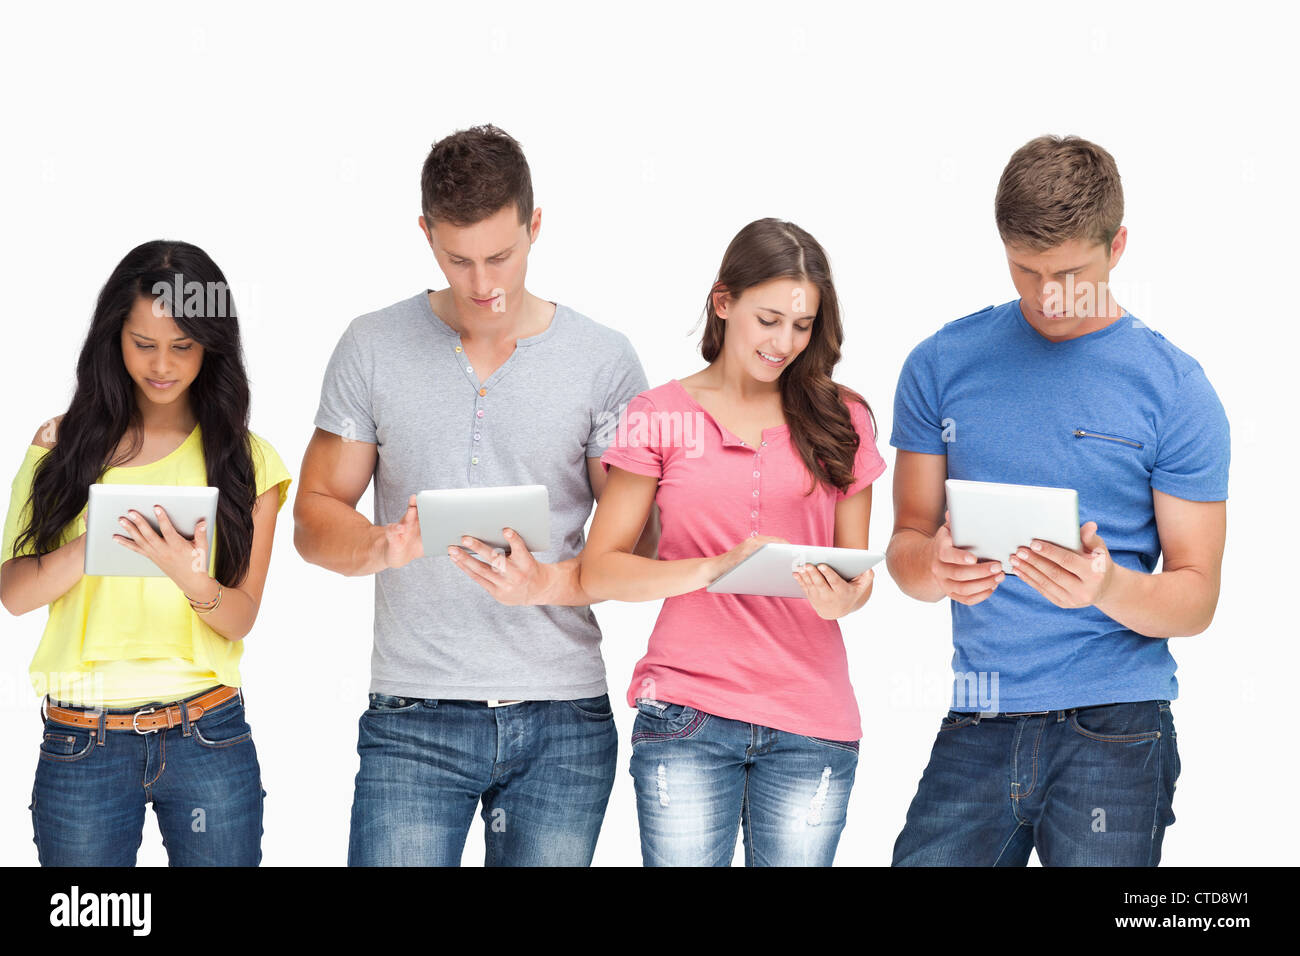 A group standing beside each other and using their tablet pc's Stock Photo